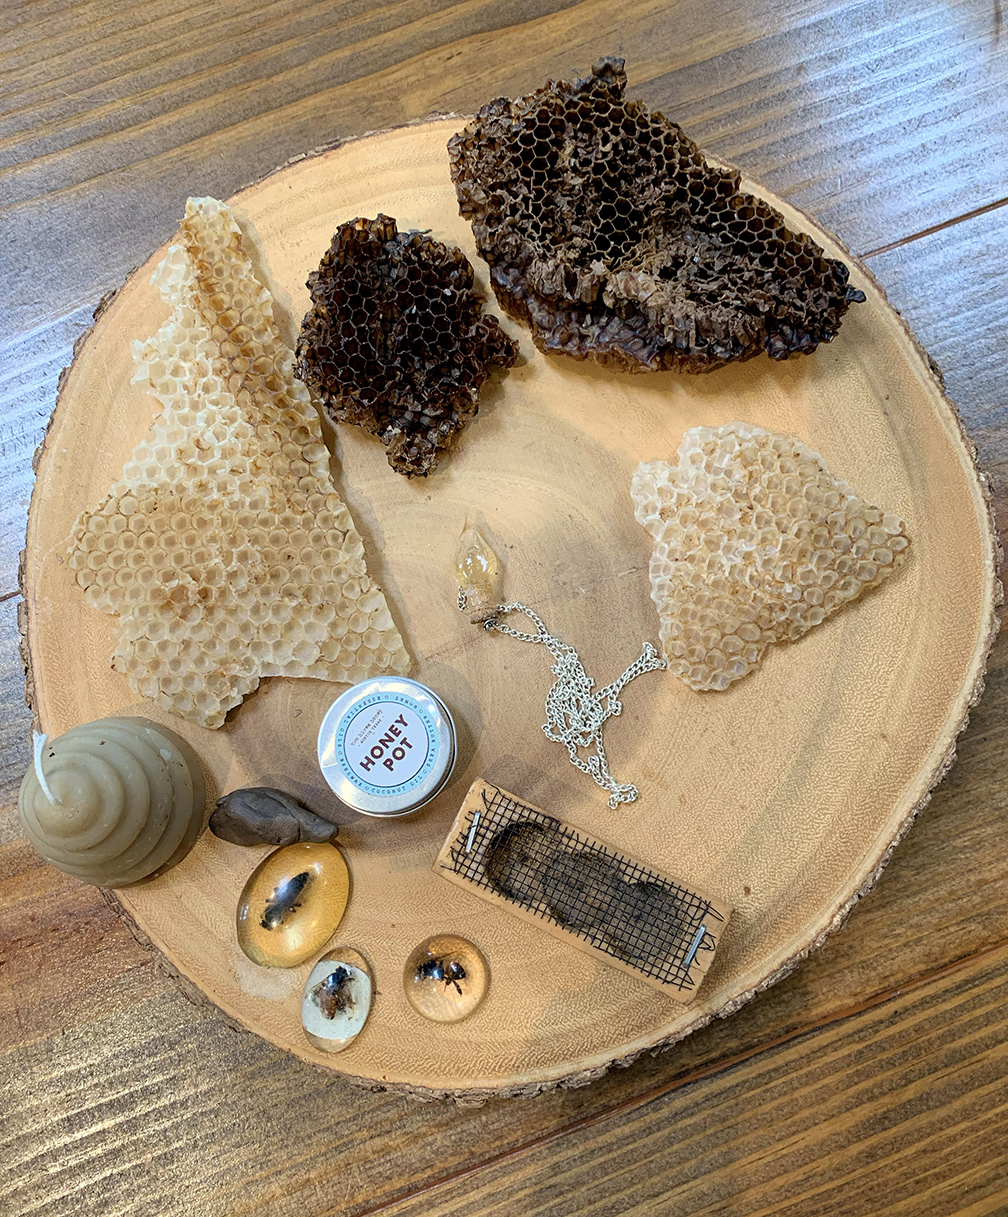 bee tour demonstration items like honeycomb and bees